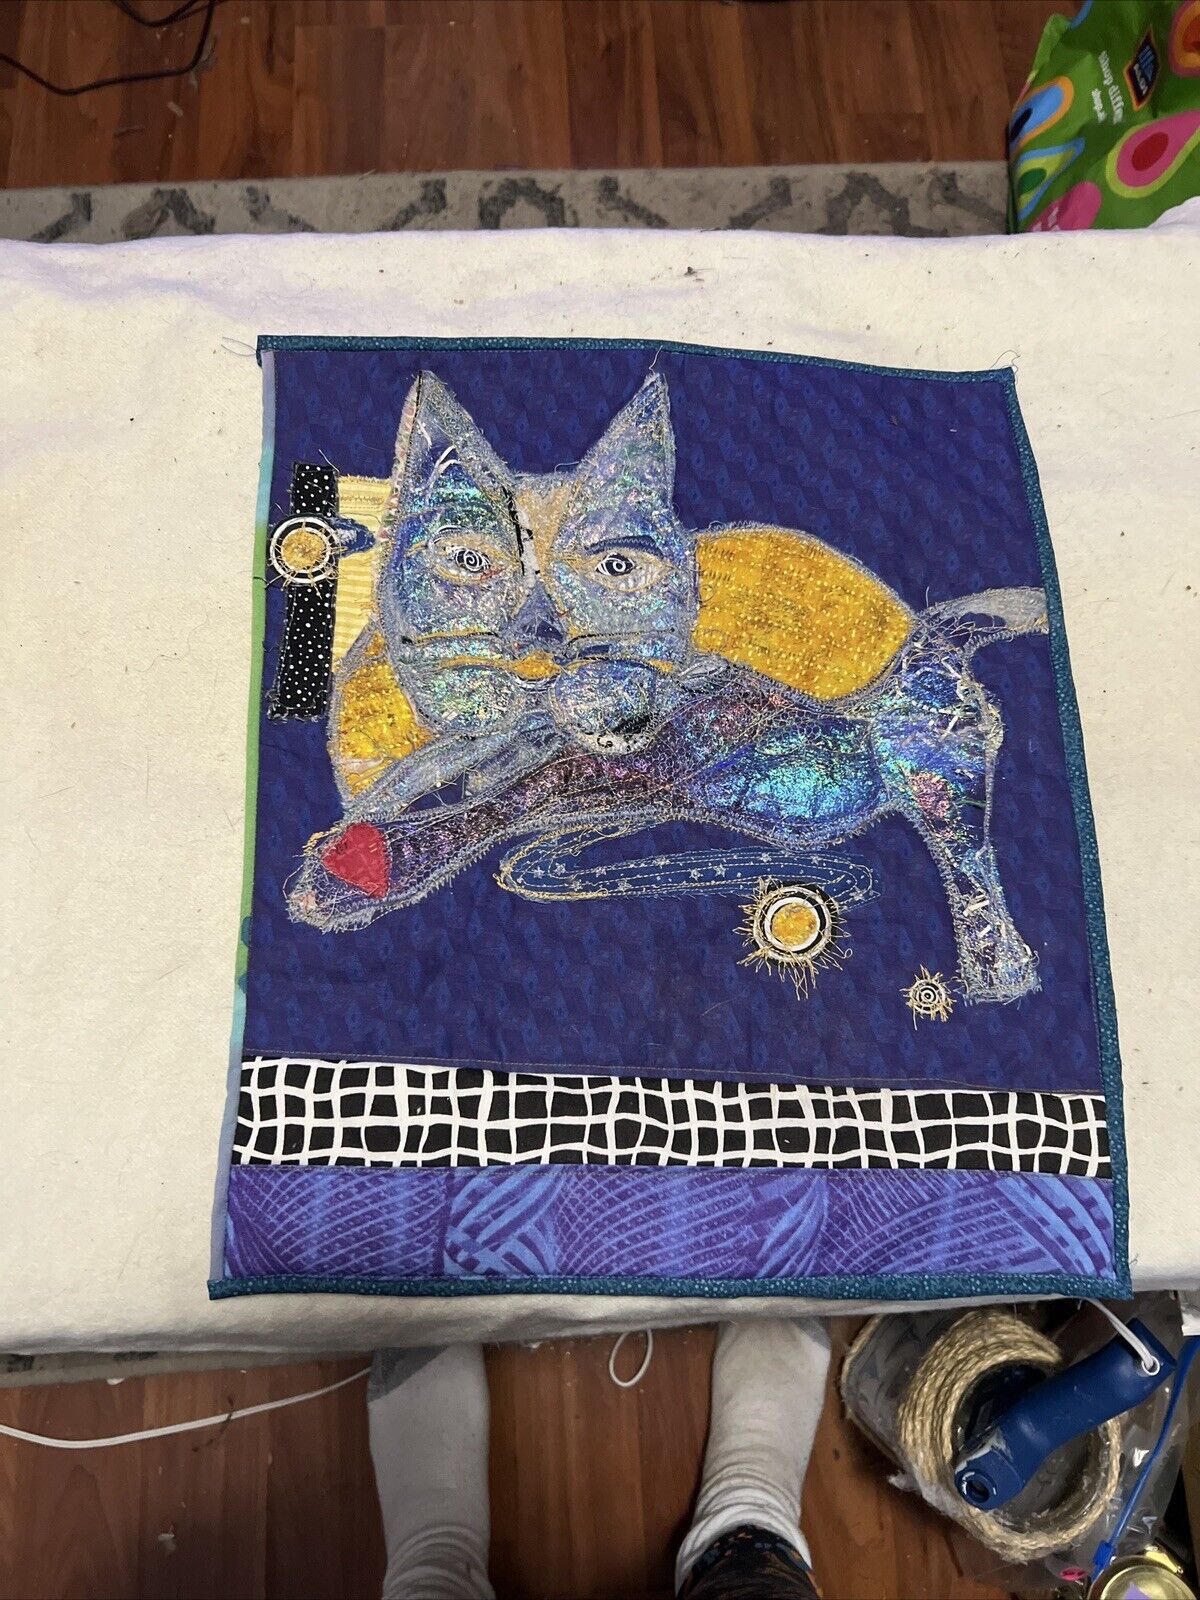 RARE OOAK ABSTRACT CAT TEXTILE WALL HANGING 16”x13.5” IRIDESCENT STUNNING